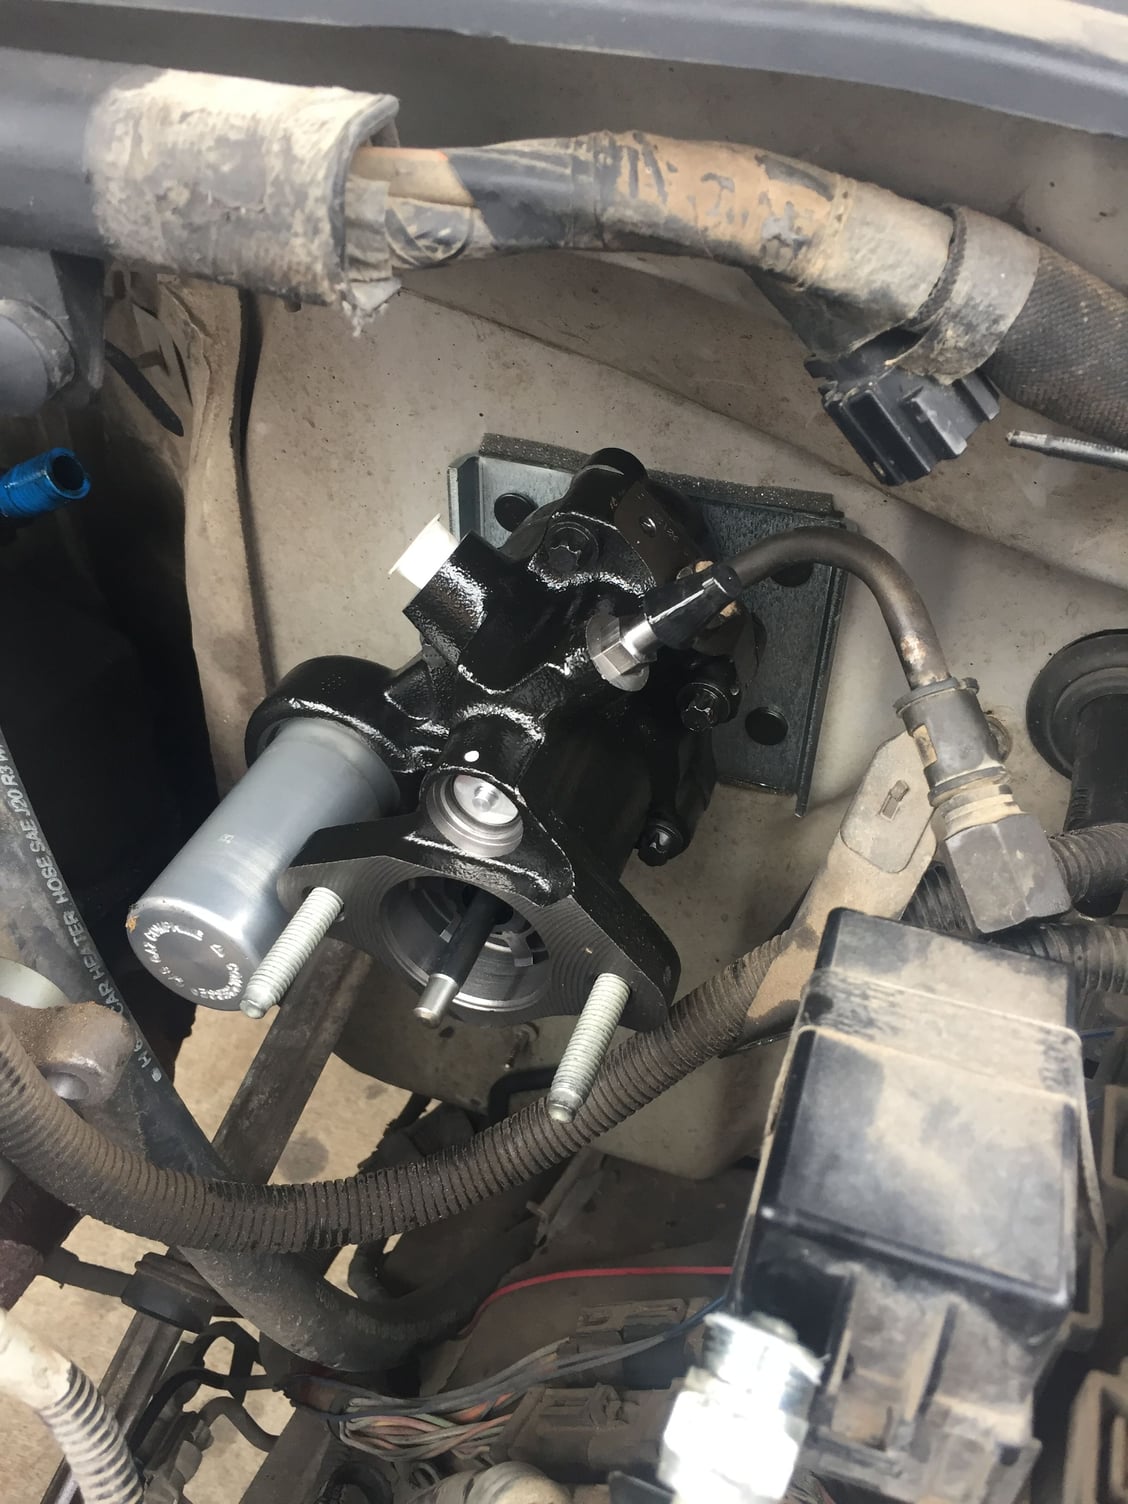 LEE power steering pump upgrade - Page 2 - Ford Truck Enthusiasts Forums